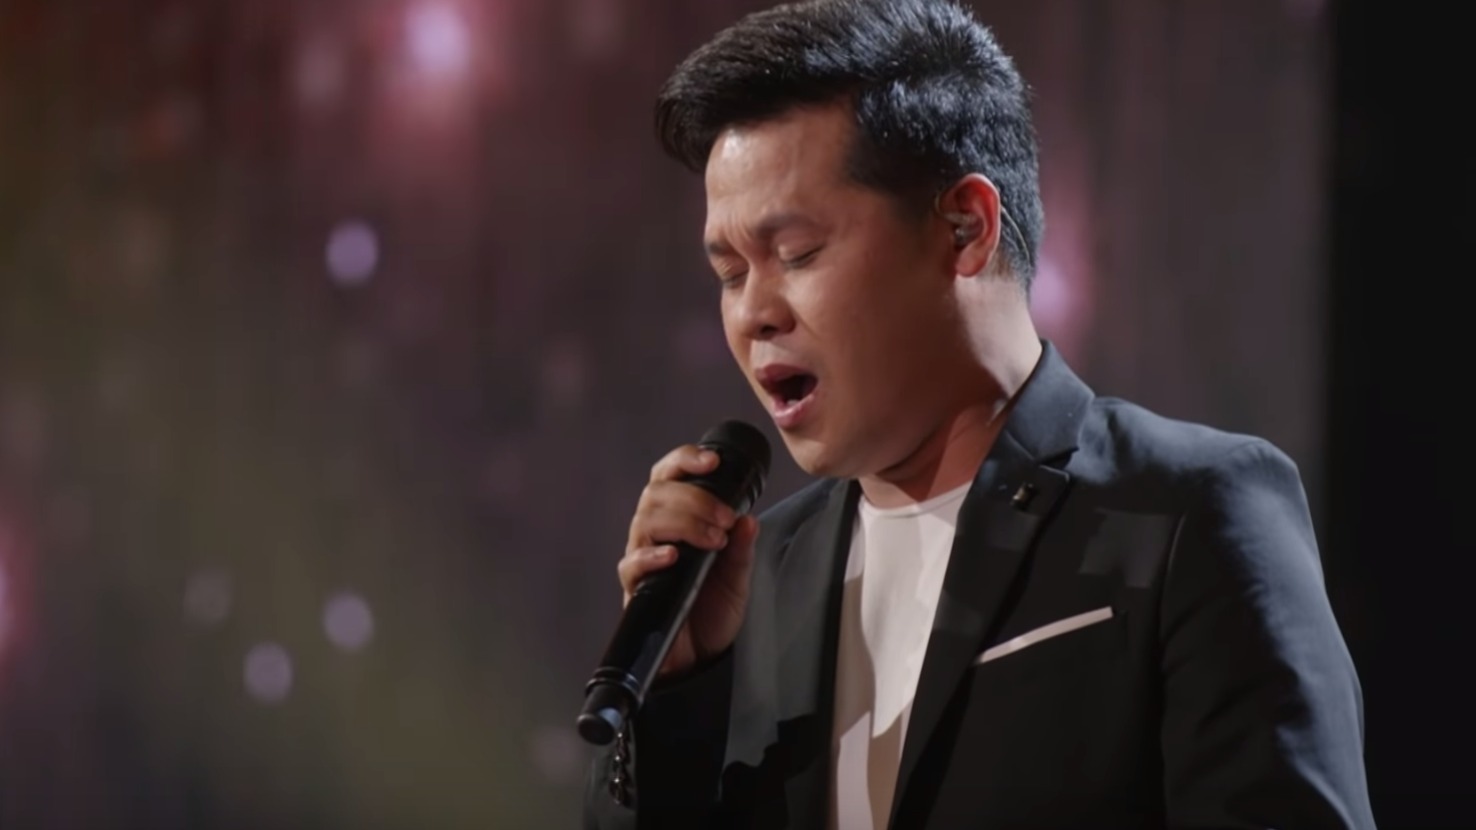 WATCH Marcelito Pomoy's showstopping performance on 'America's Got